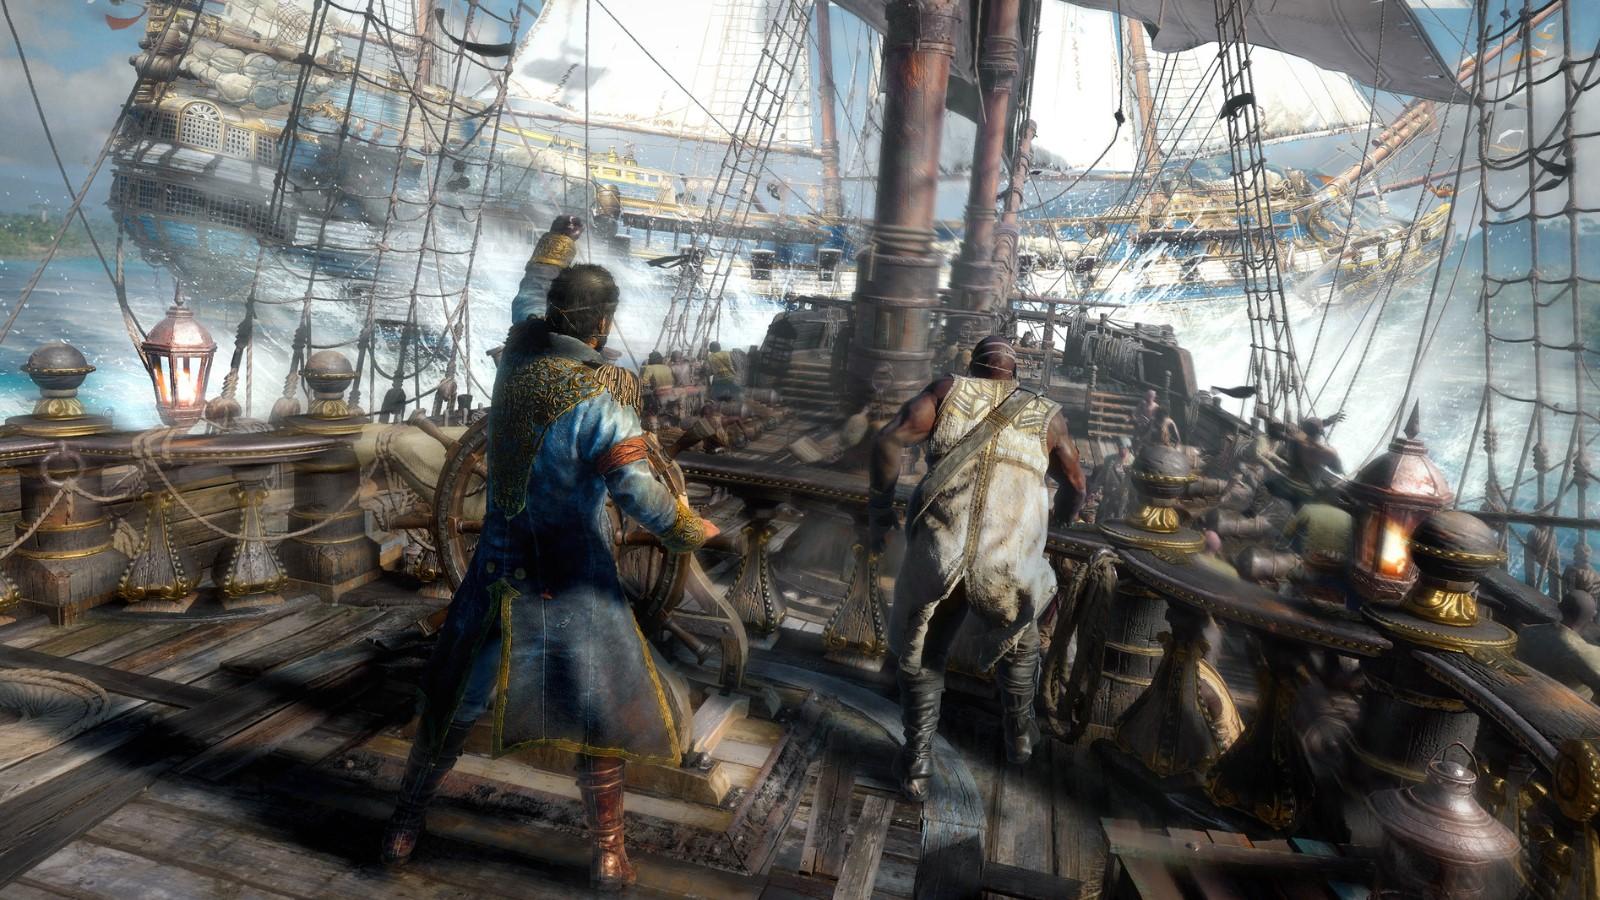 A captain stands at the helm of his ship during vicious naval combat in Skull and Bones